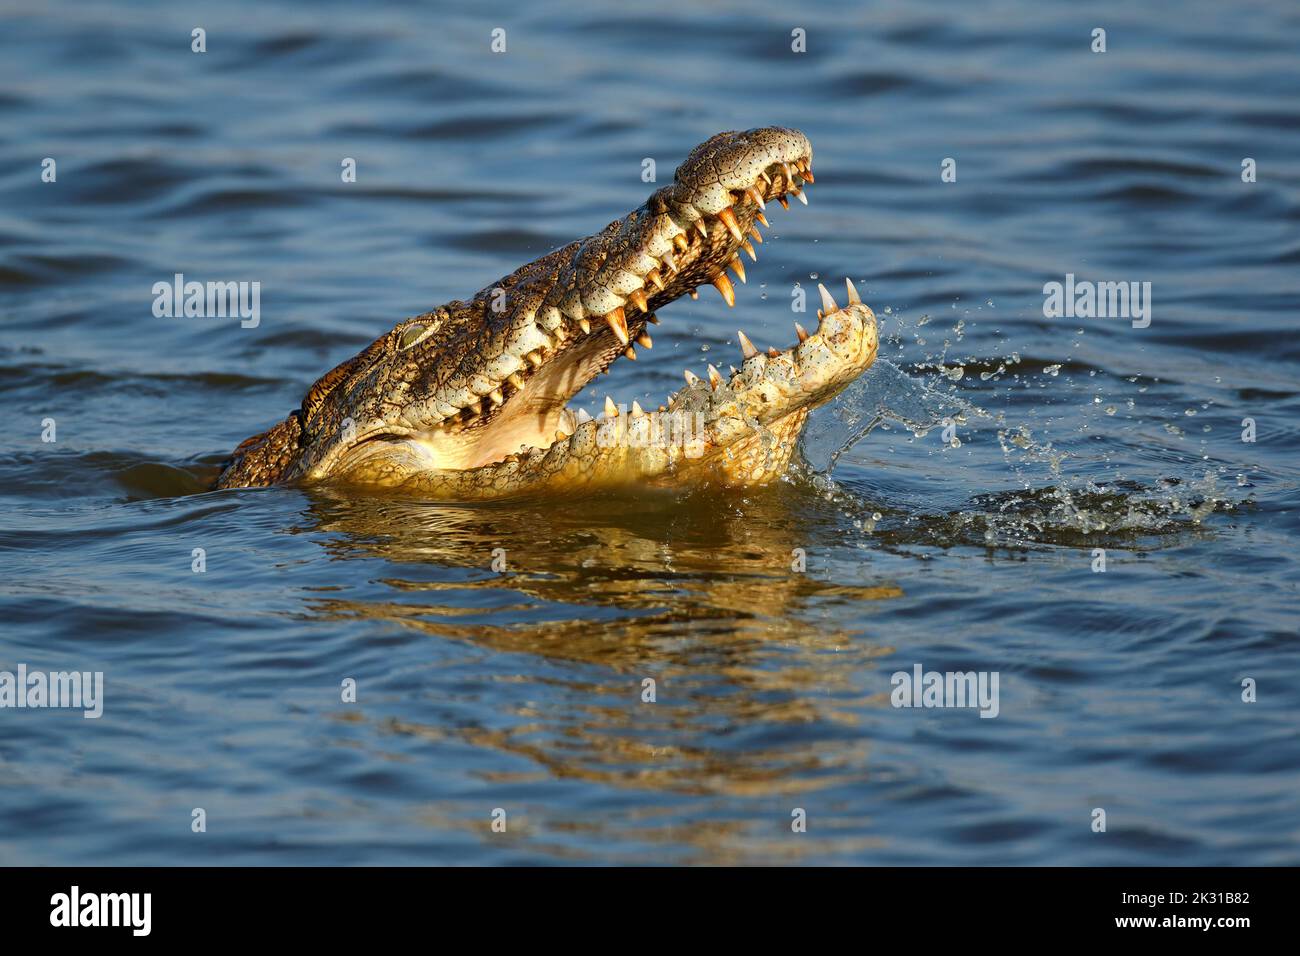 Portrait of a large Nile crocodile (Crocodylus niloticus) with open jaws in water, Kruger National Park, South Africa Stock Photo